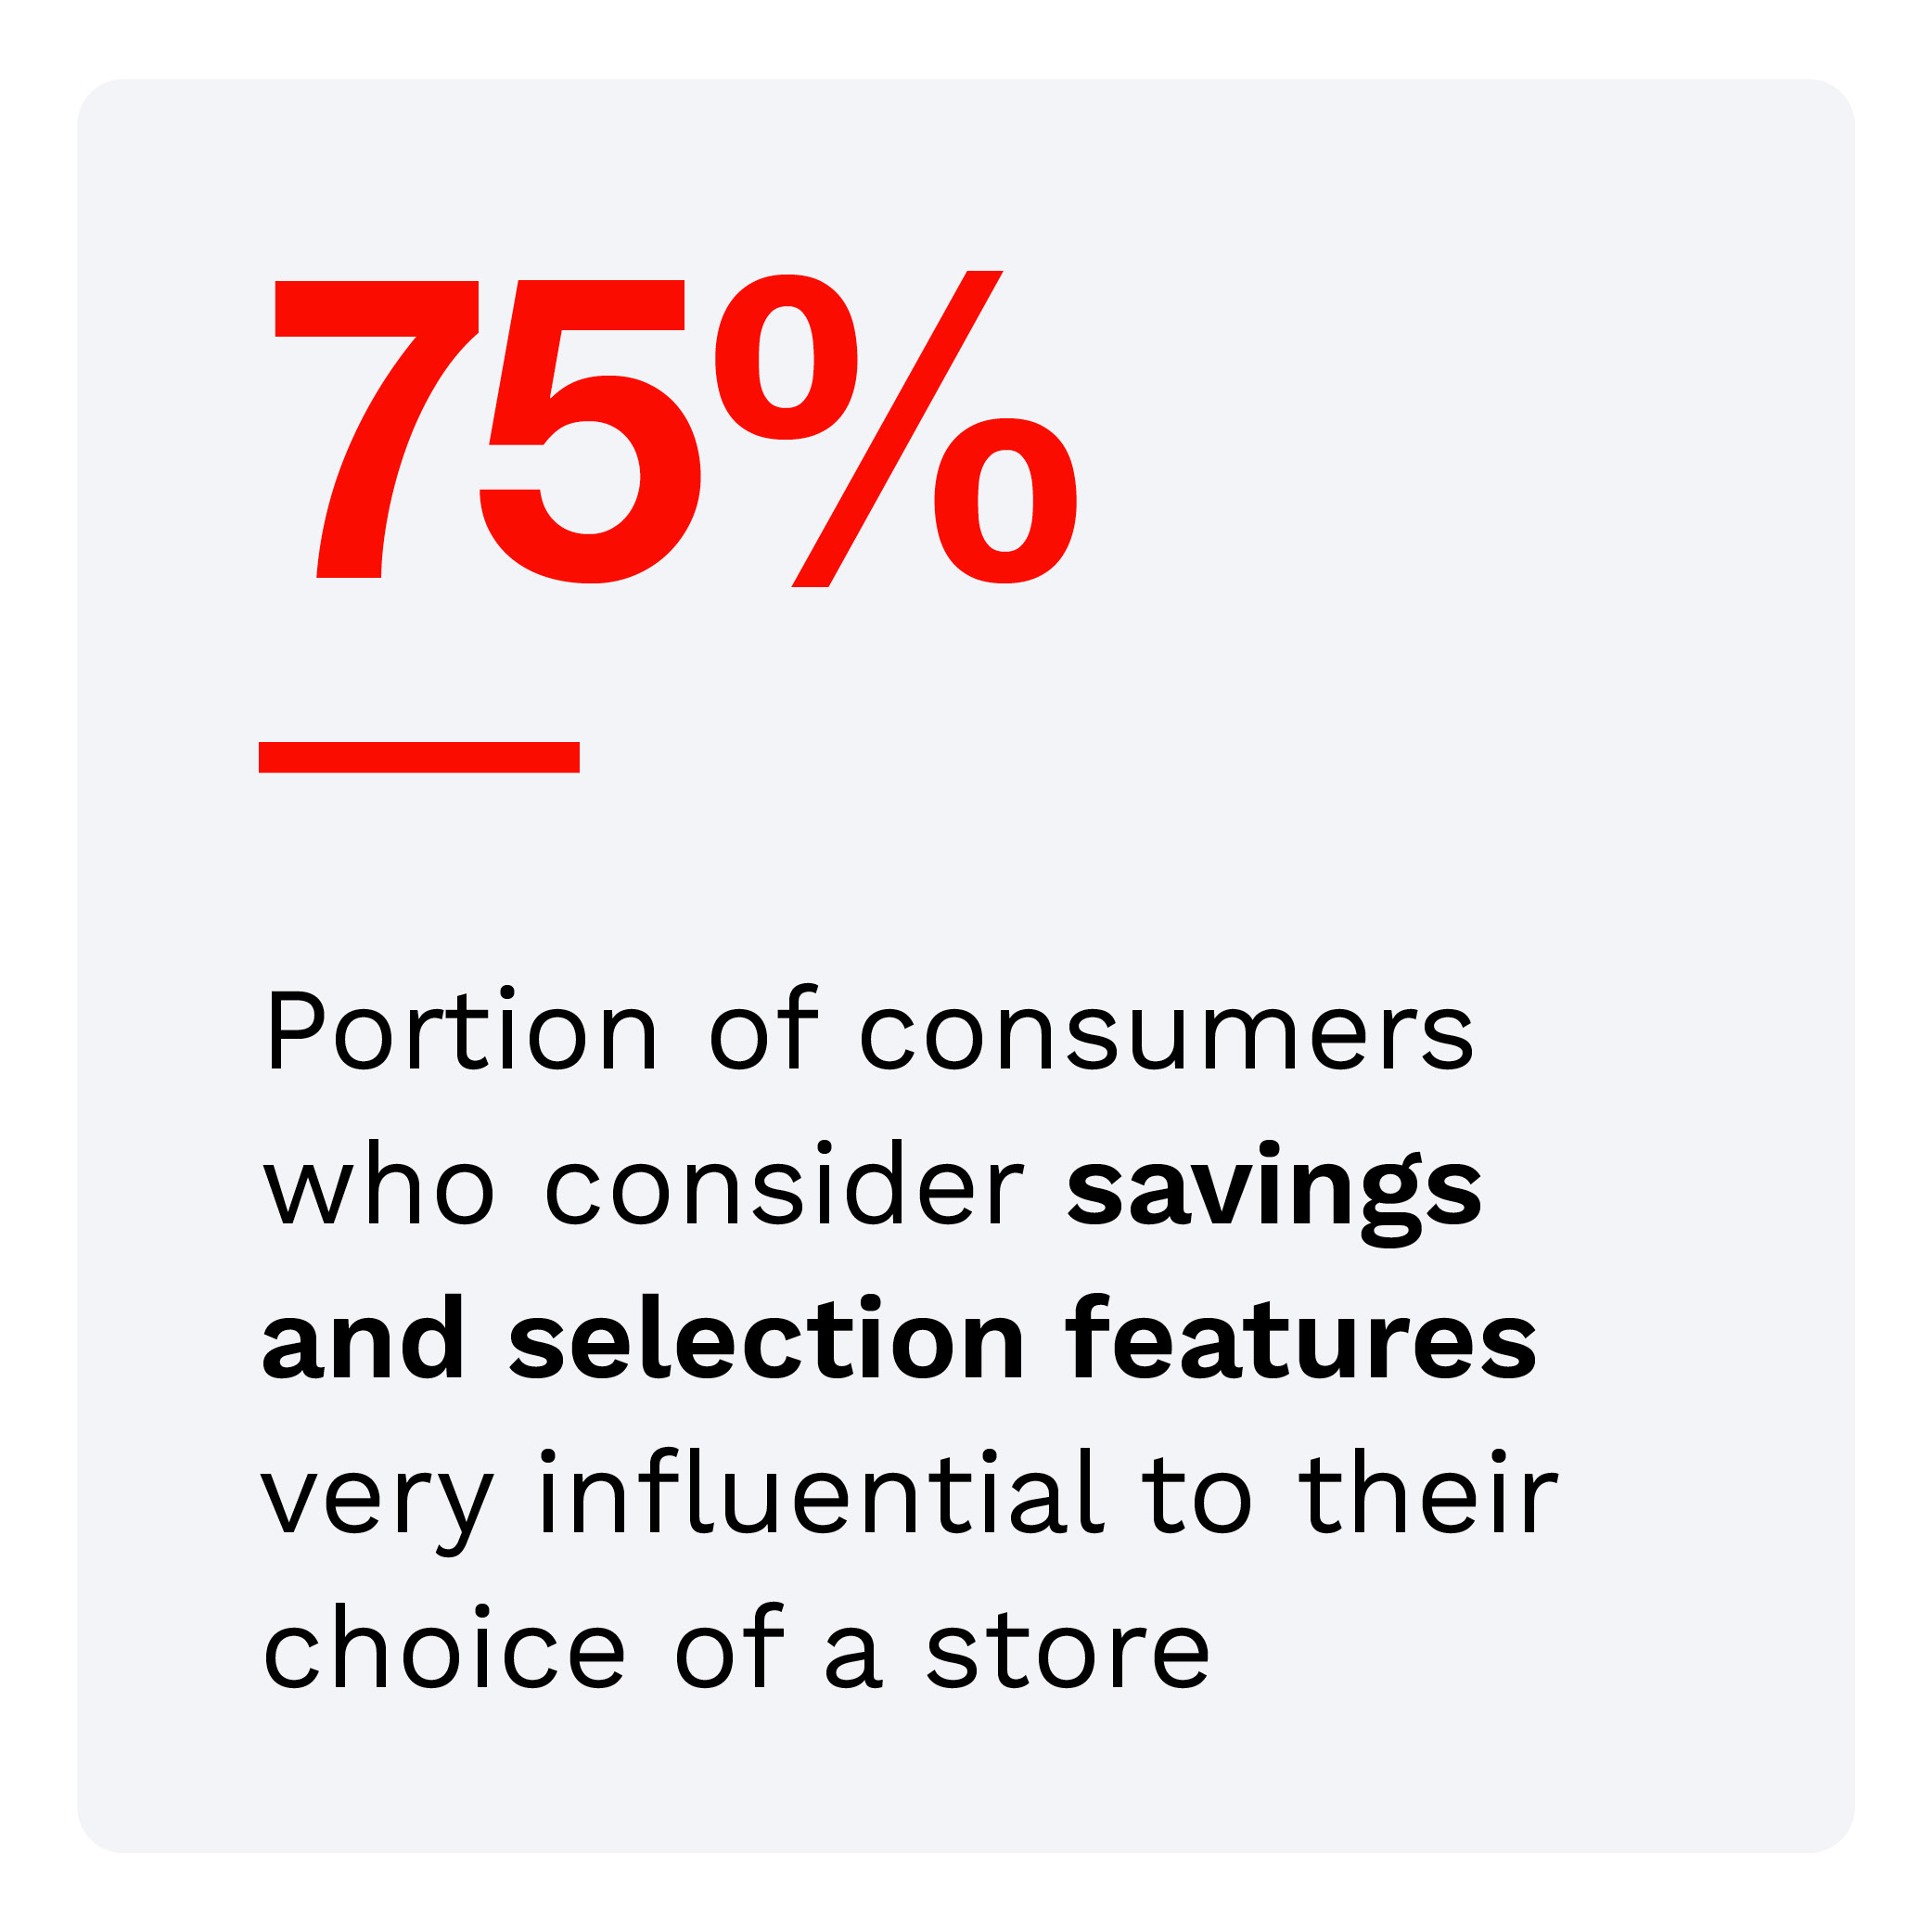 75%: Portion of consumers who consider savings and selection features very influential to their choice of a store